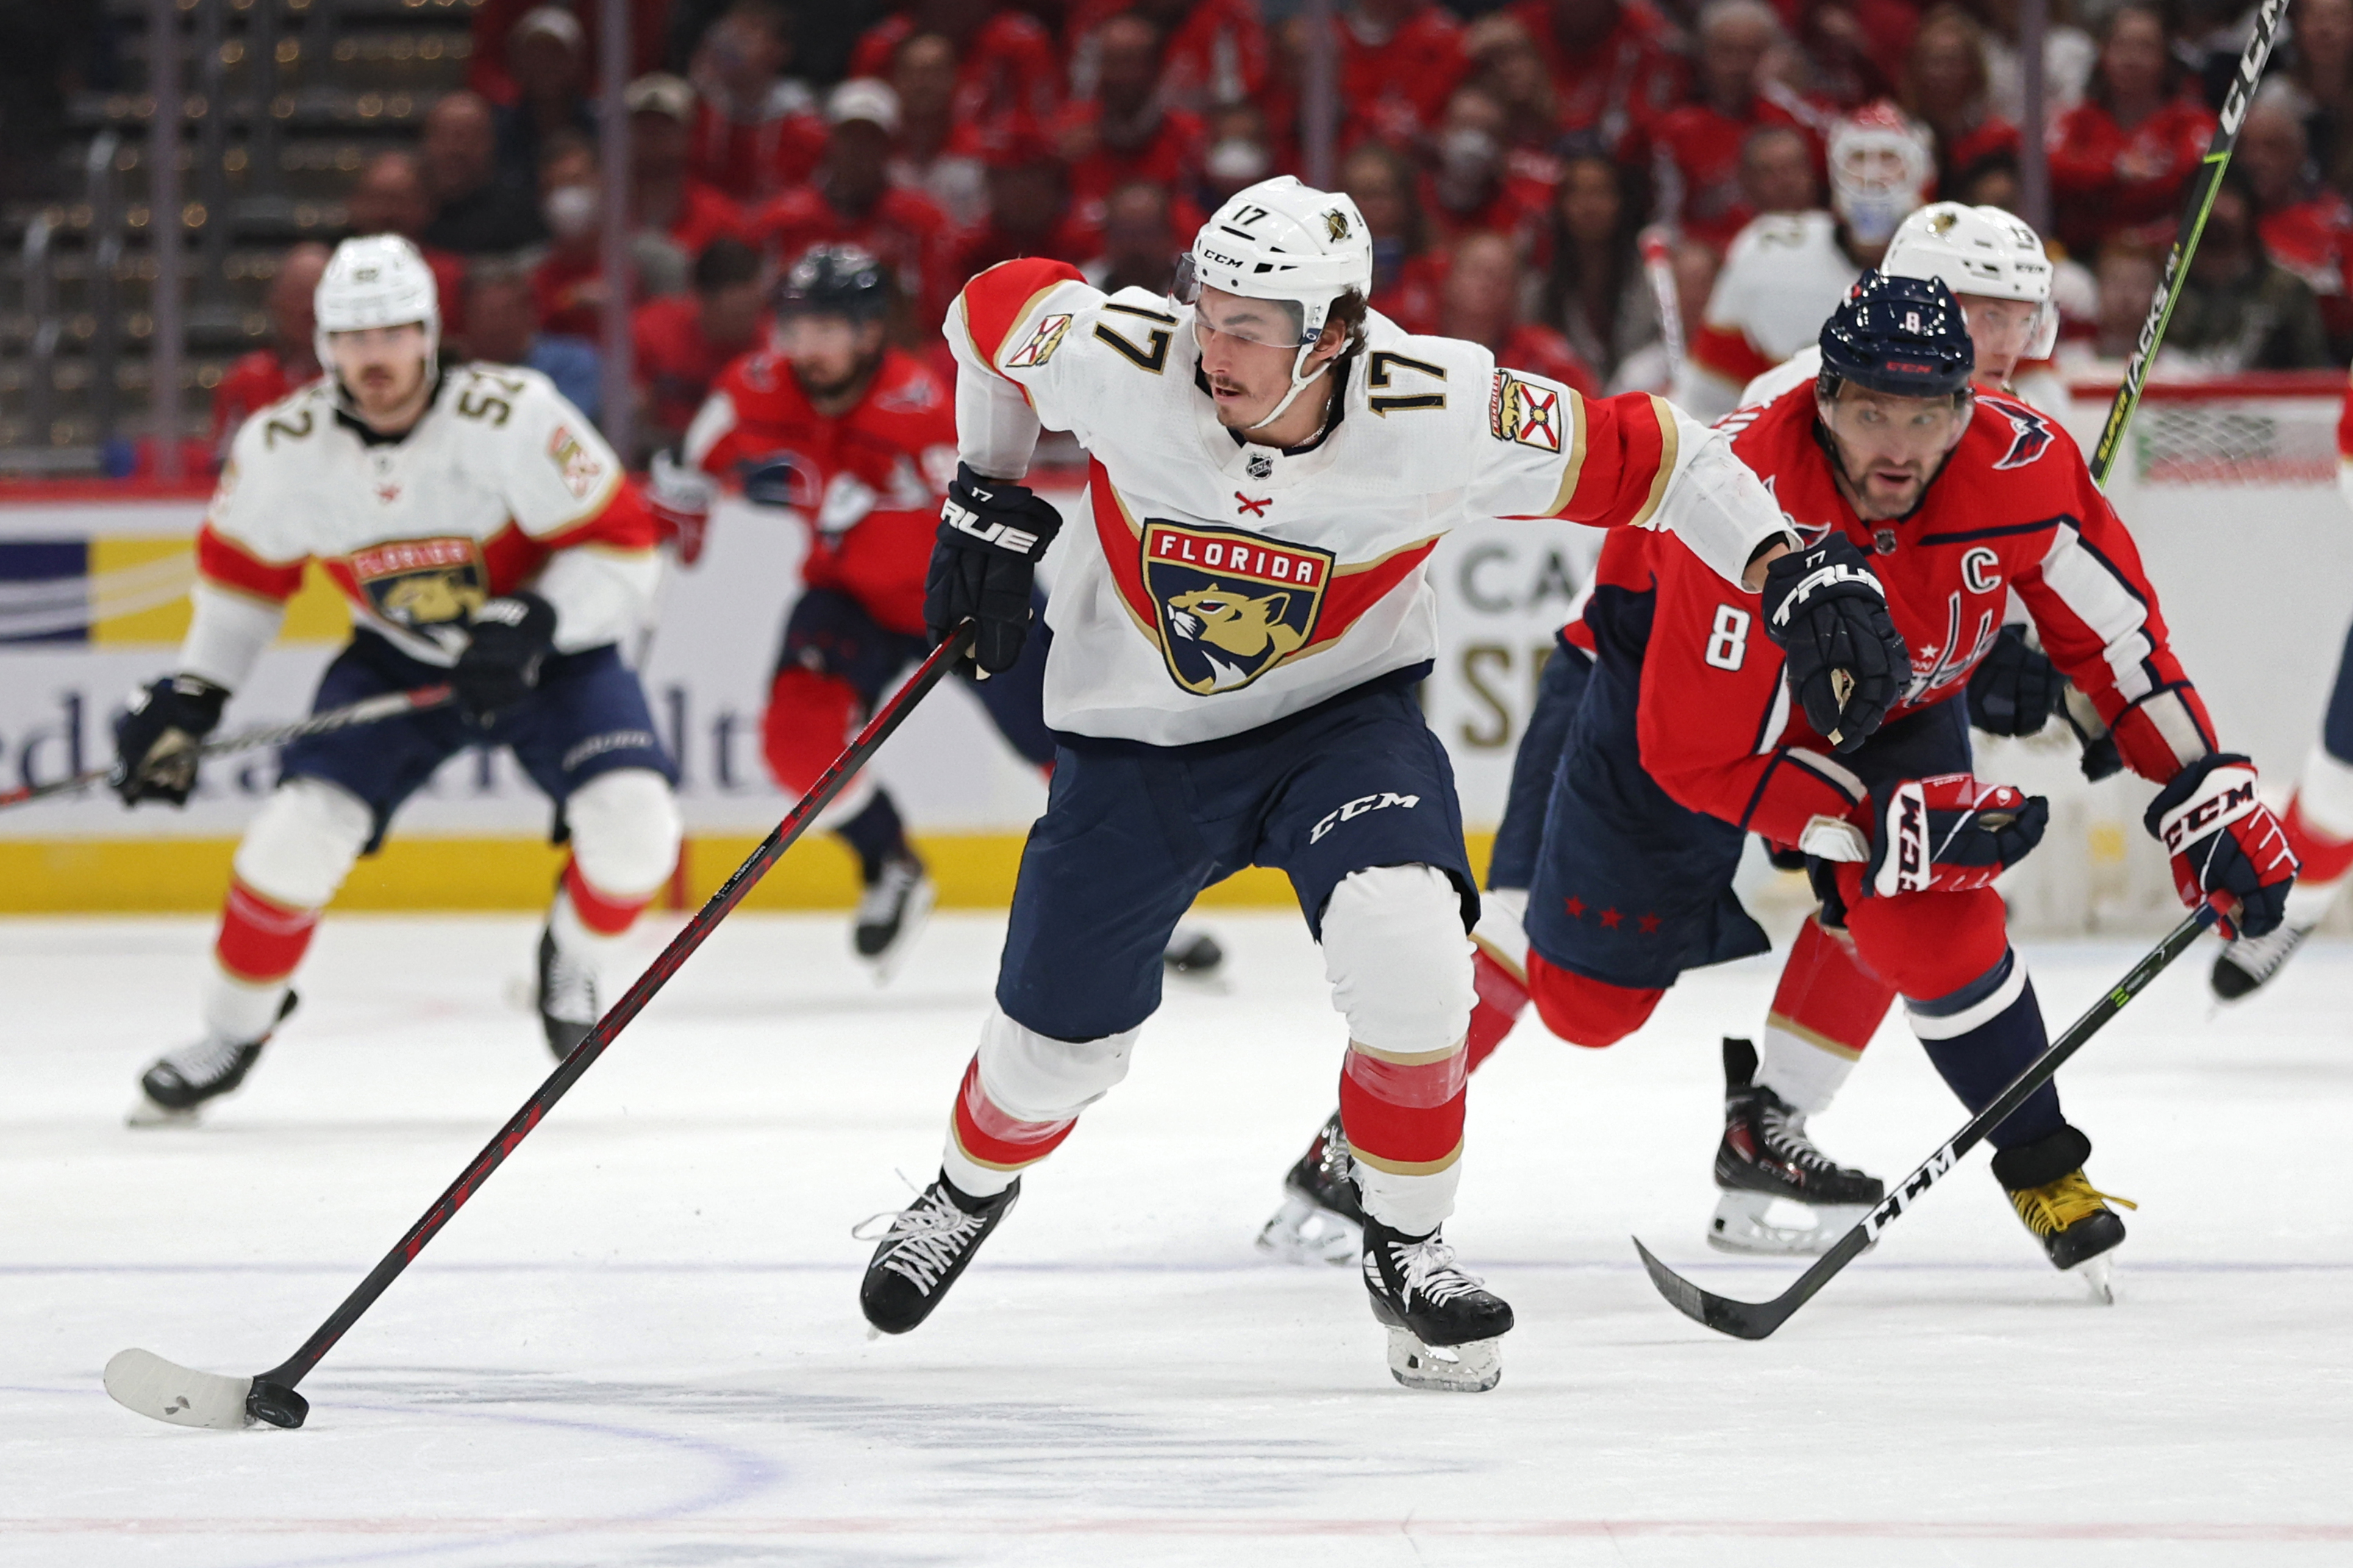 Alex Ovechkin, who is definitely not on the Florida Panthers